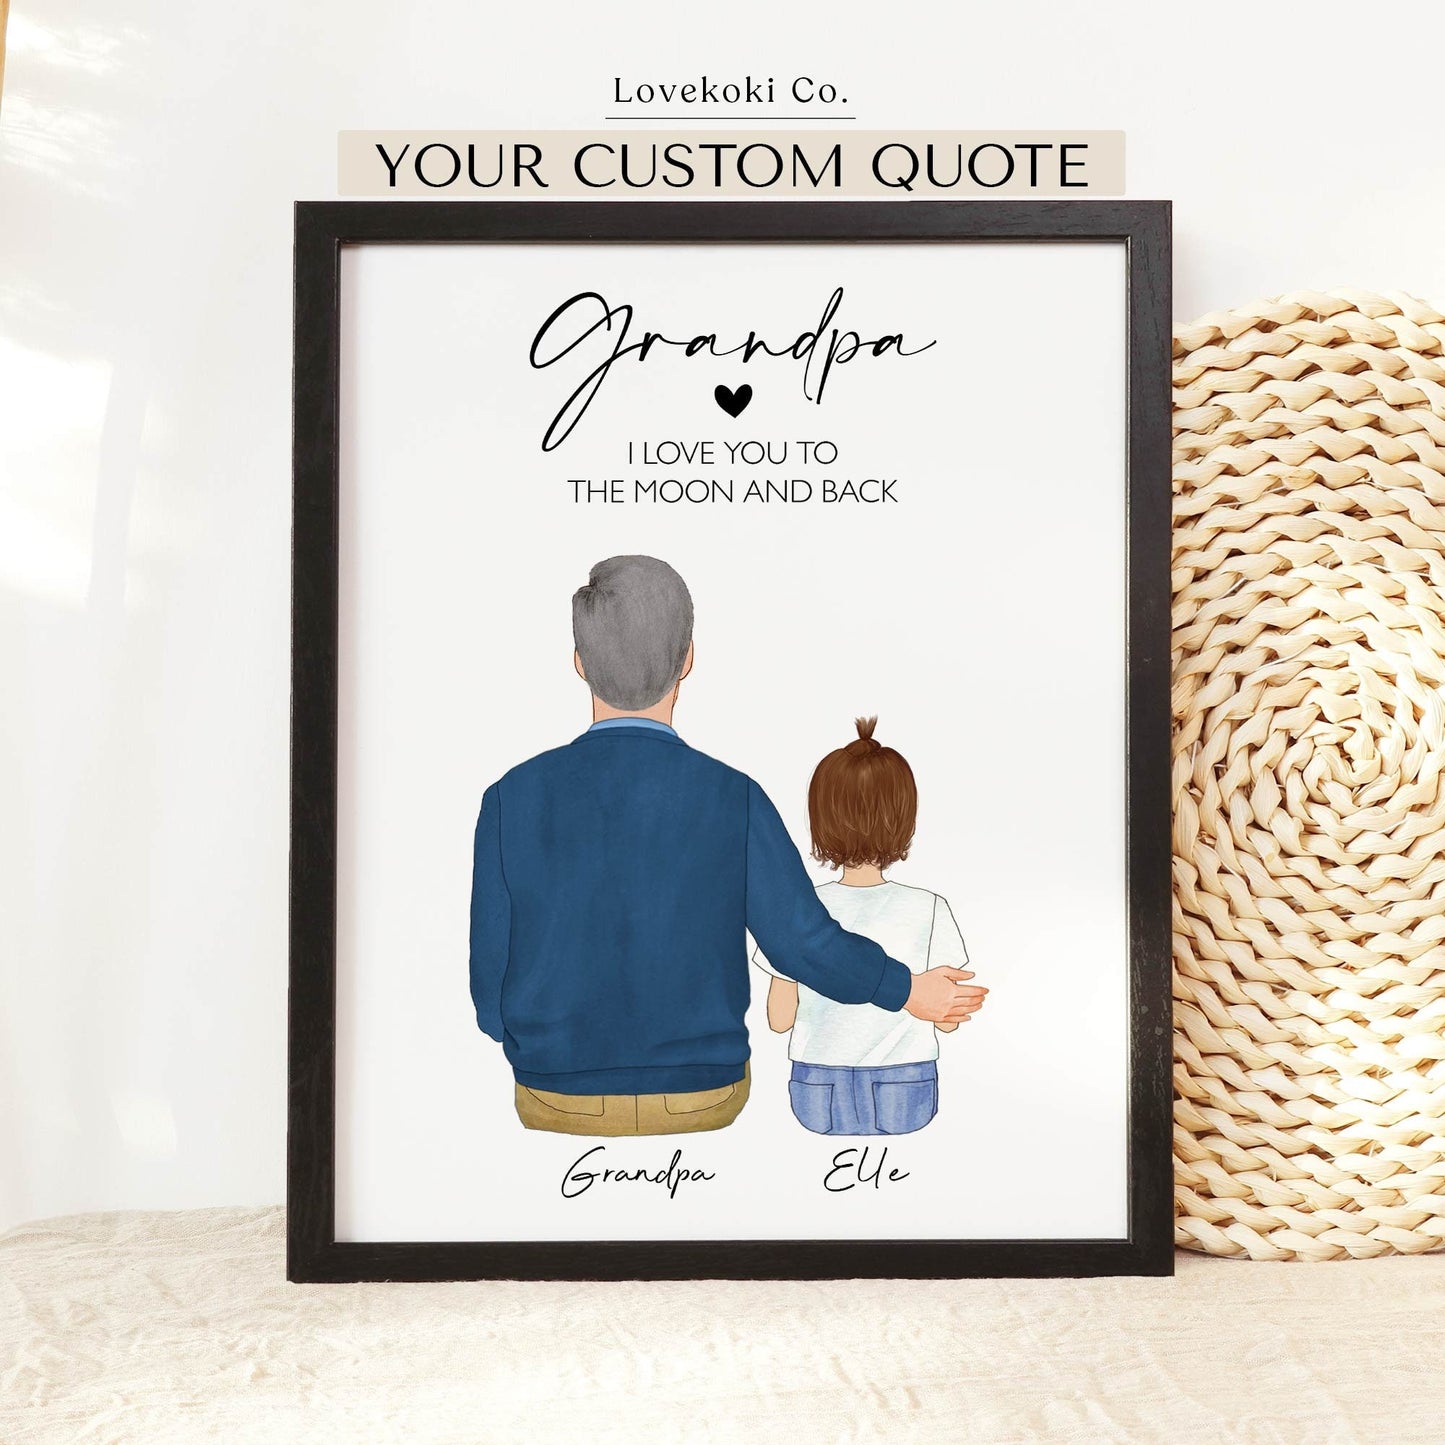 Personalized Chritmas for Grandpa, Grandfather and Grandson Wall Art Illustration, Custom Granddad gift, Unique gift for Papa, Pawpaw, Pop